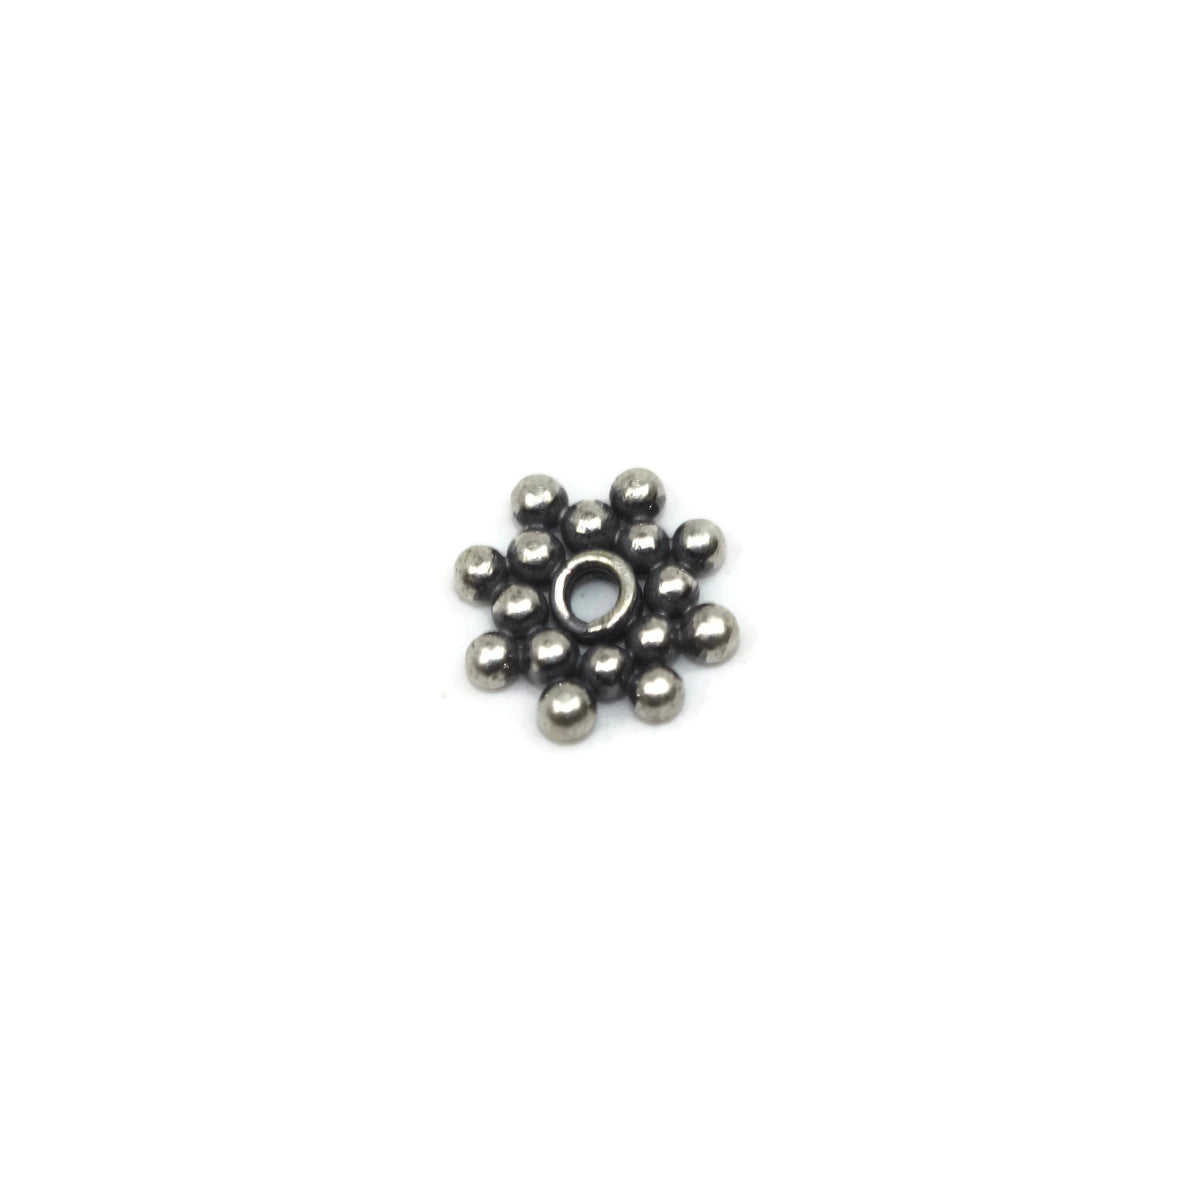 Bali Bead Sterling Silver Flower Daisy Spacer Bead 1.5 x 7mm